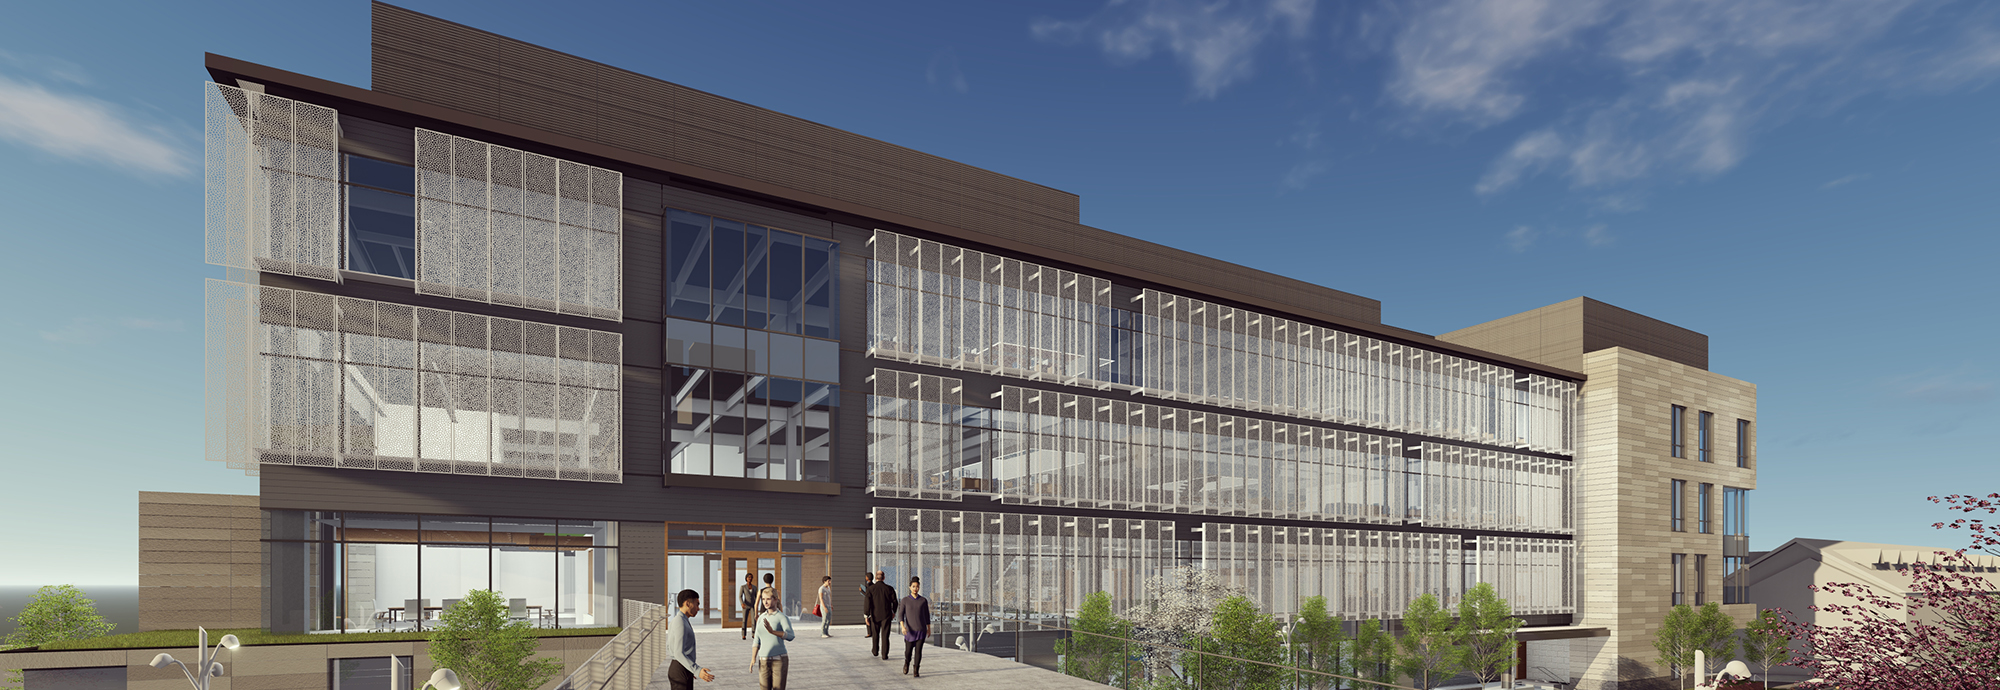 rendering of the HST building